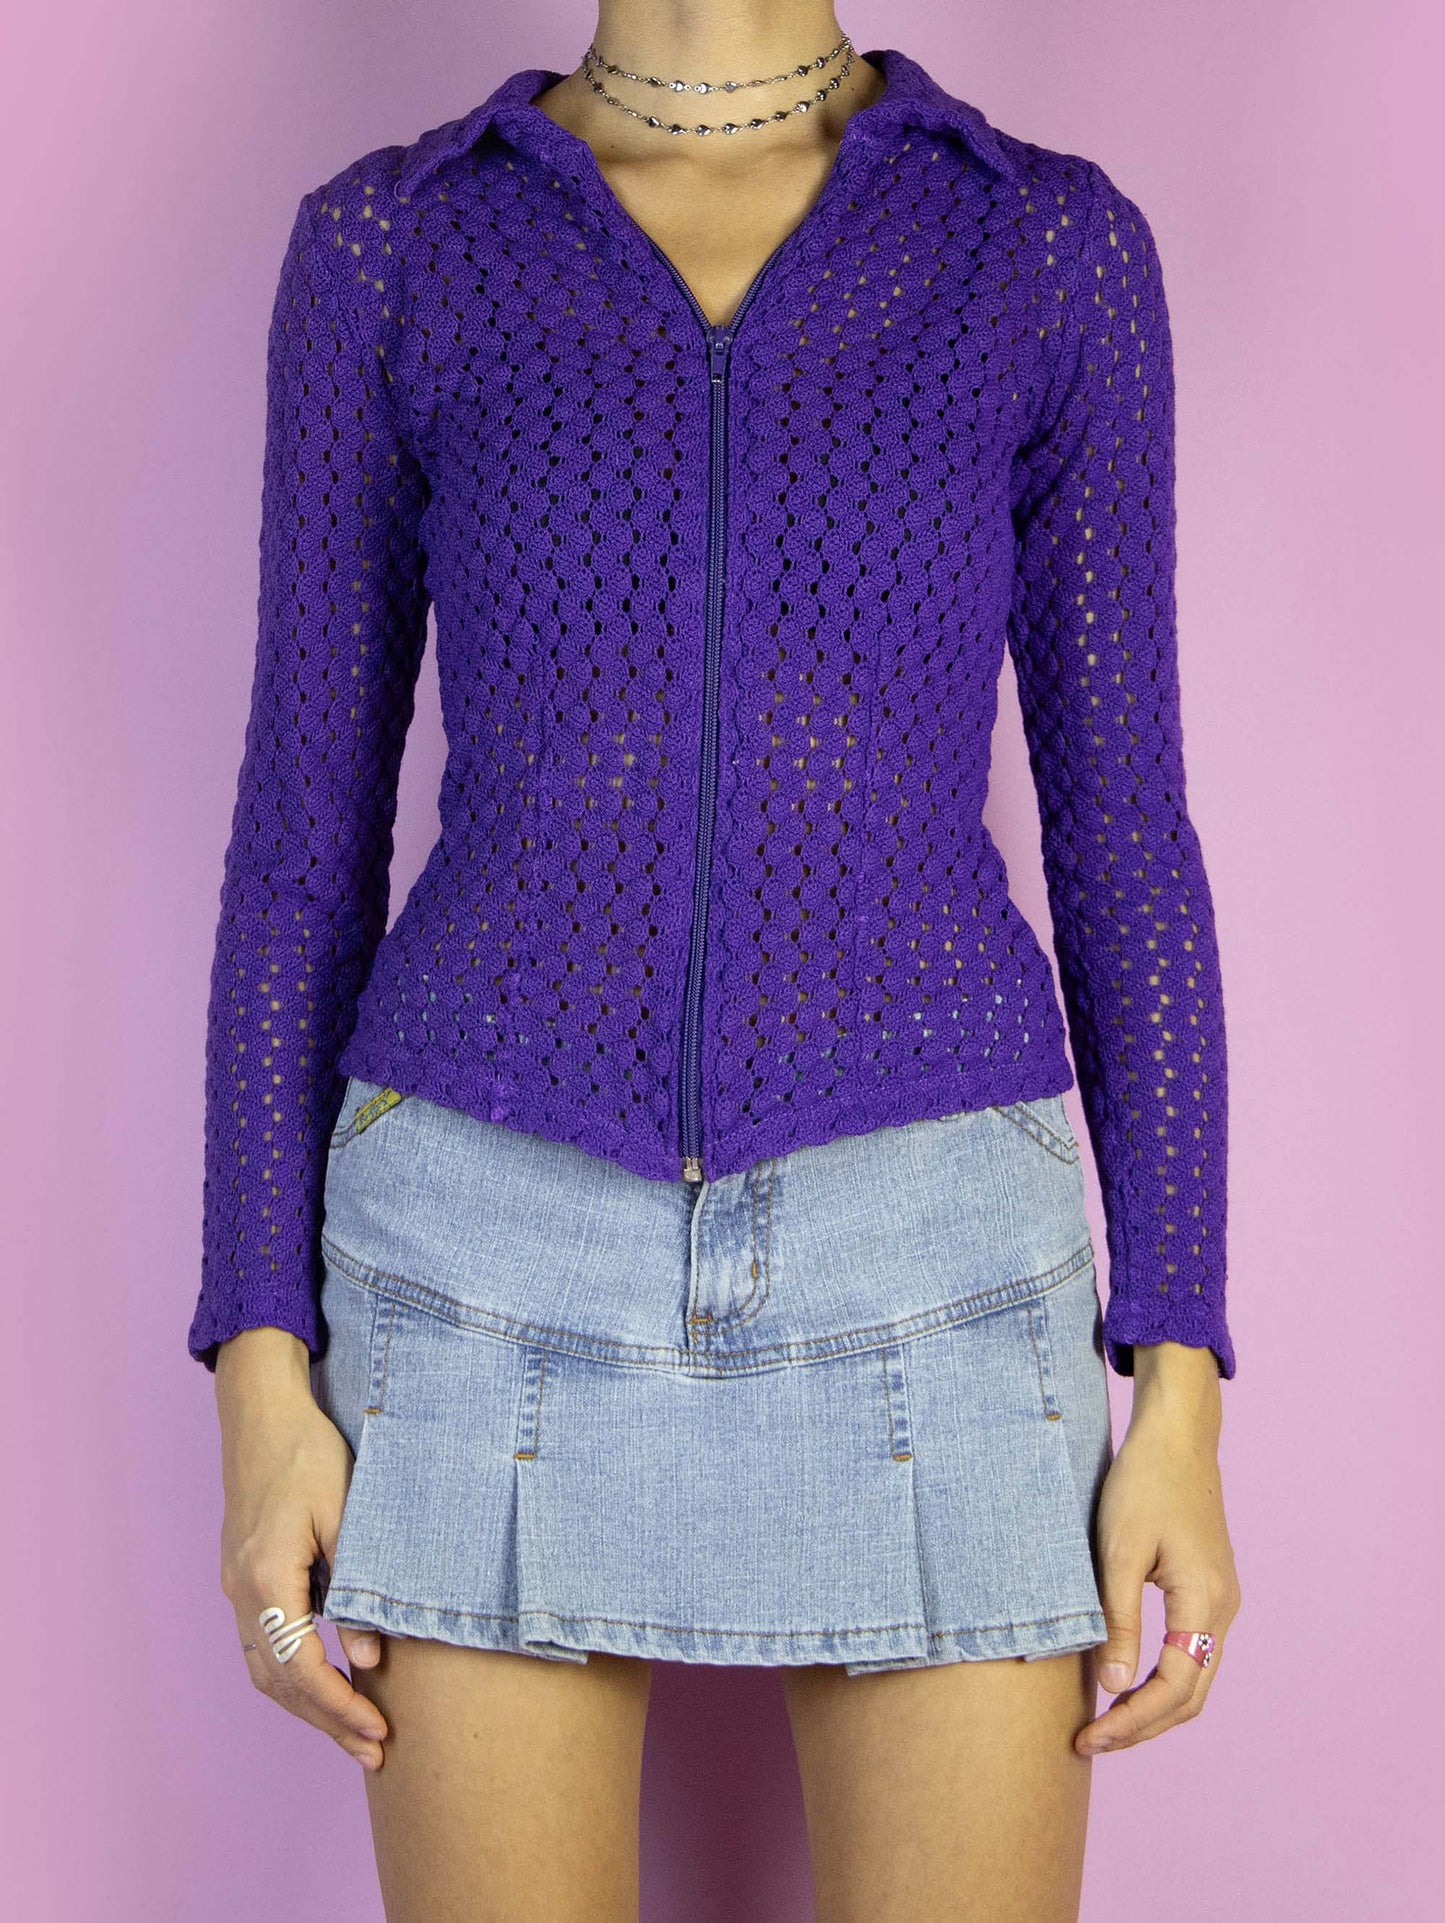 The Y2K Purple Zipper Knit Cardigan is a vintage purple top with a collar and front zipper closure. Boho fairy grunge 2000s crochet knit sweater.